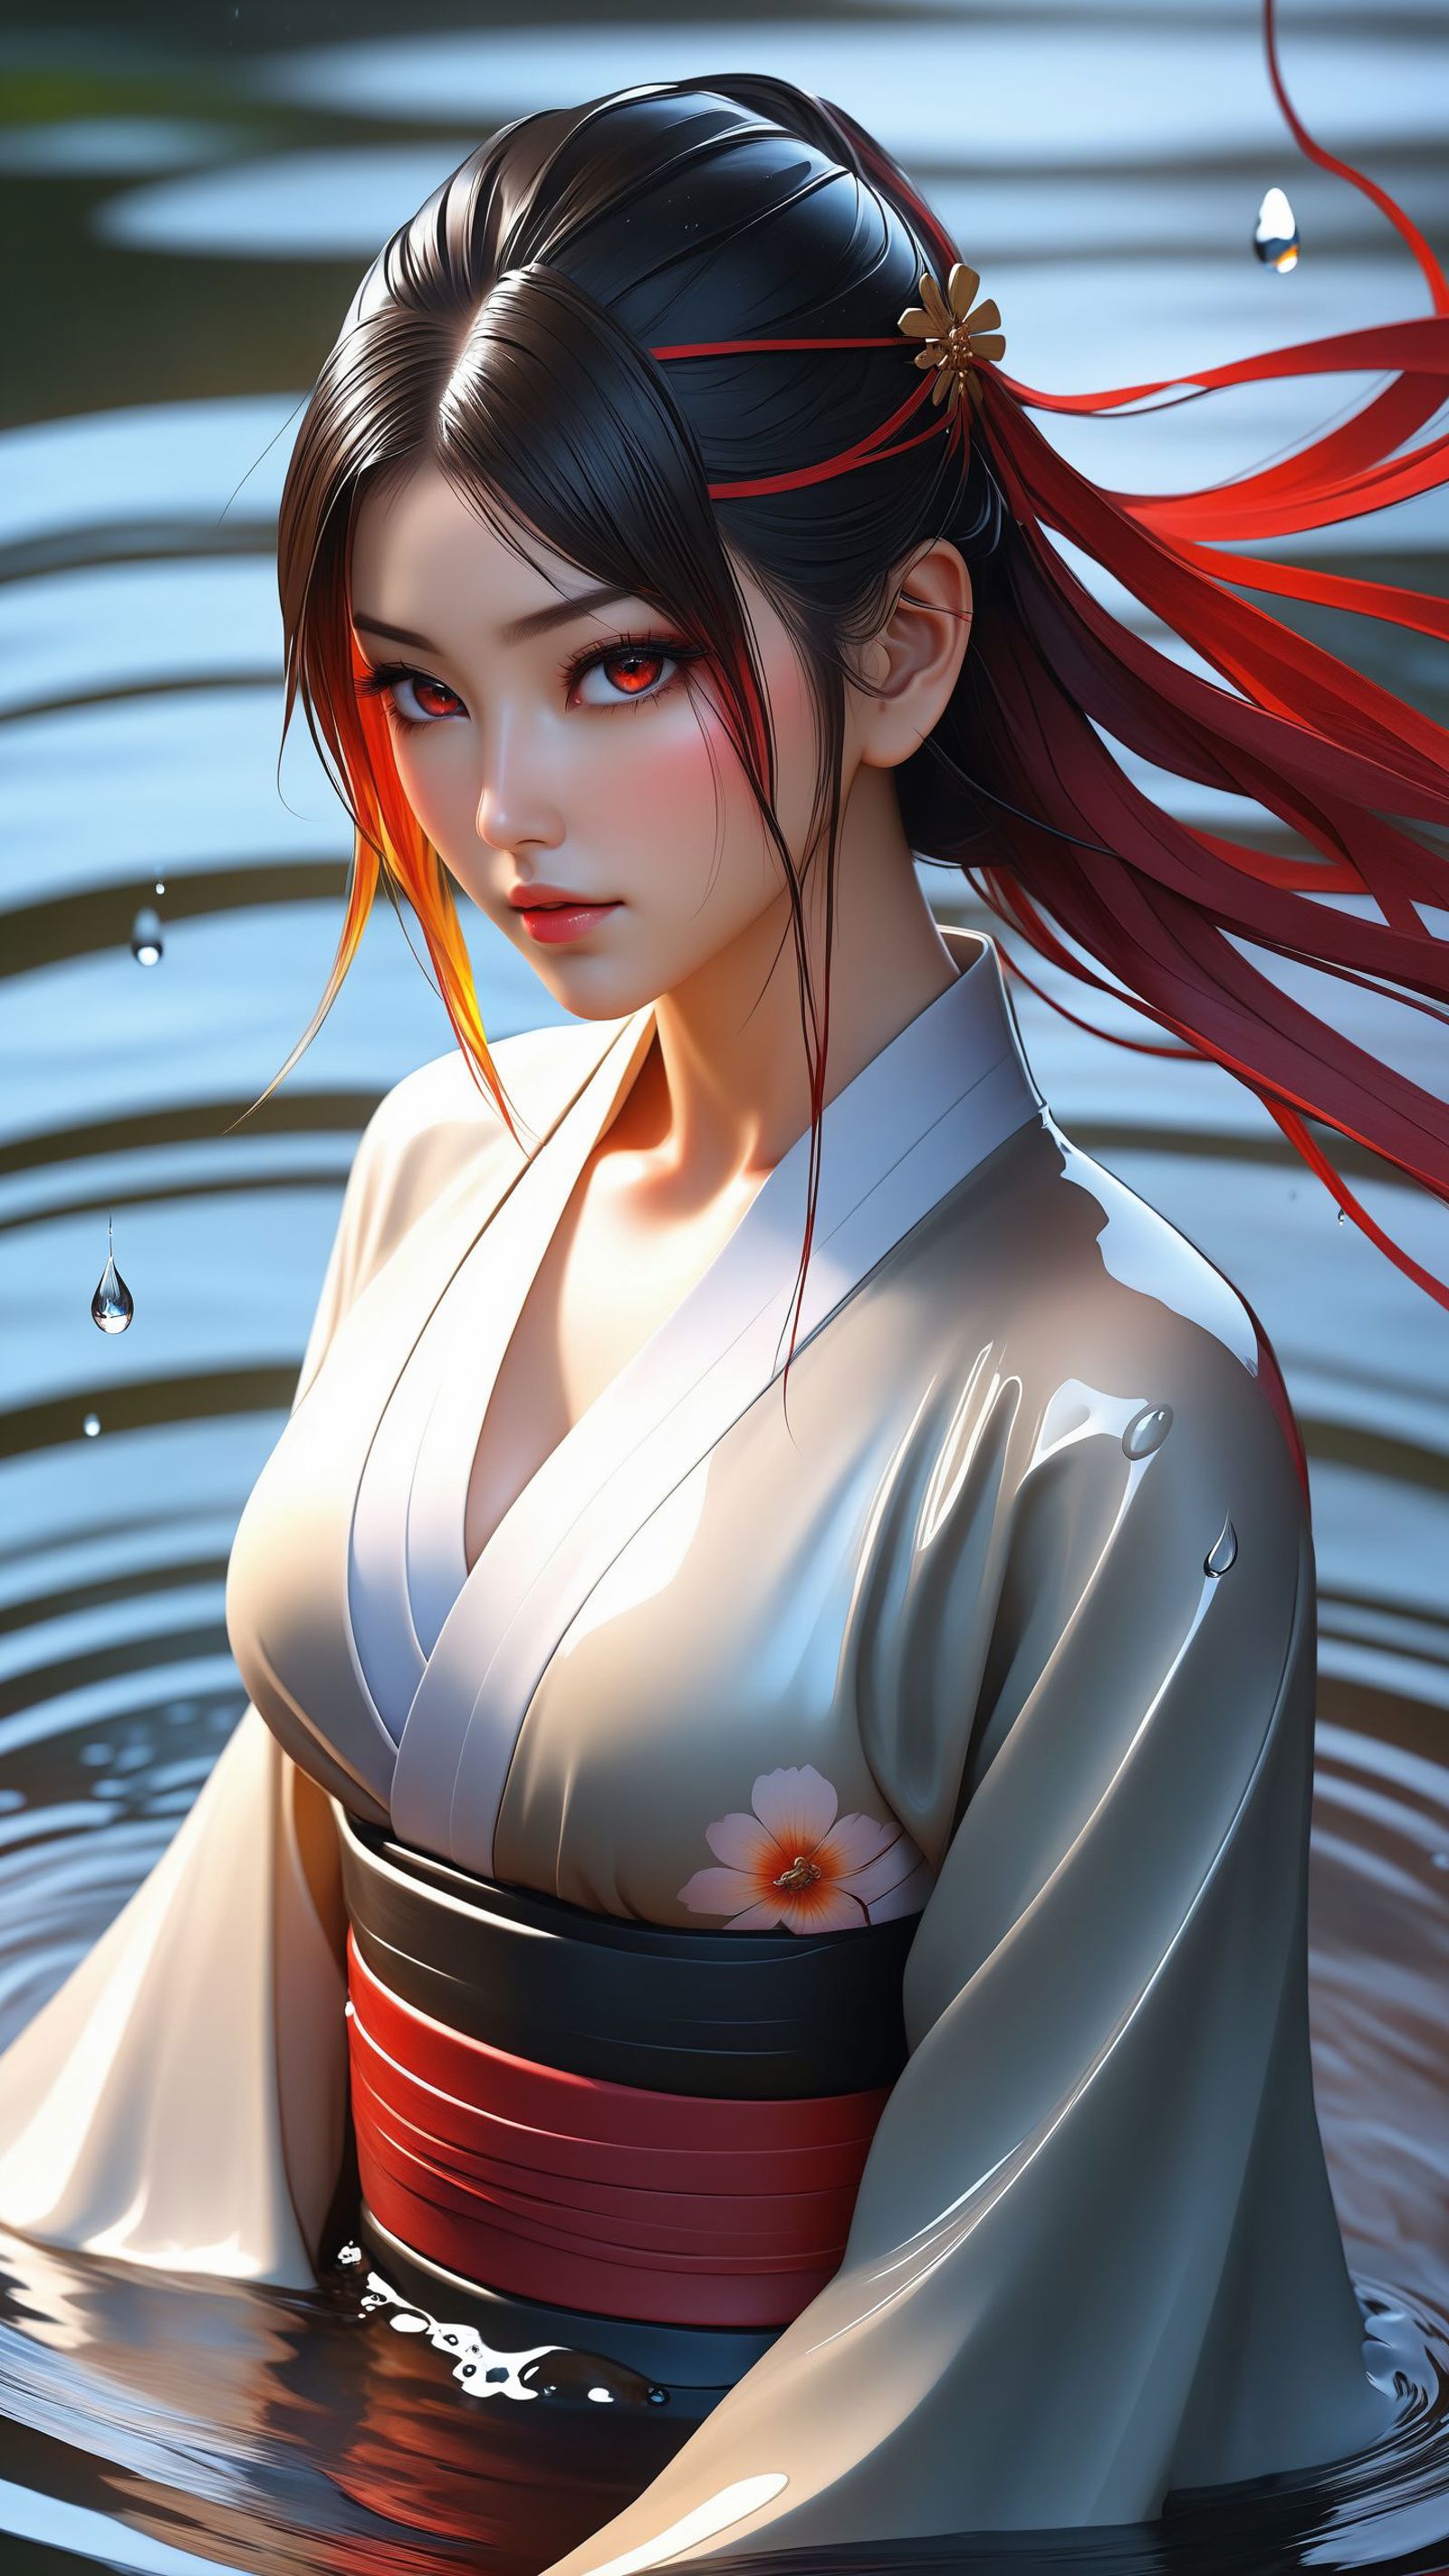 Anime girl with red hair and flowers on her dress posing in water.